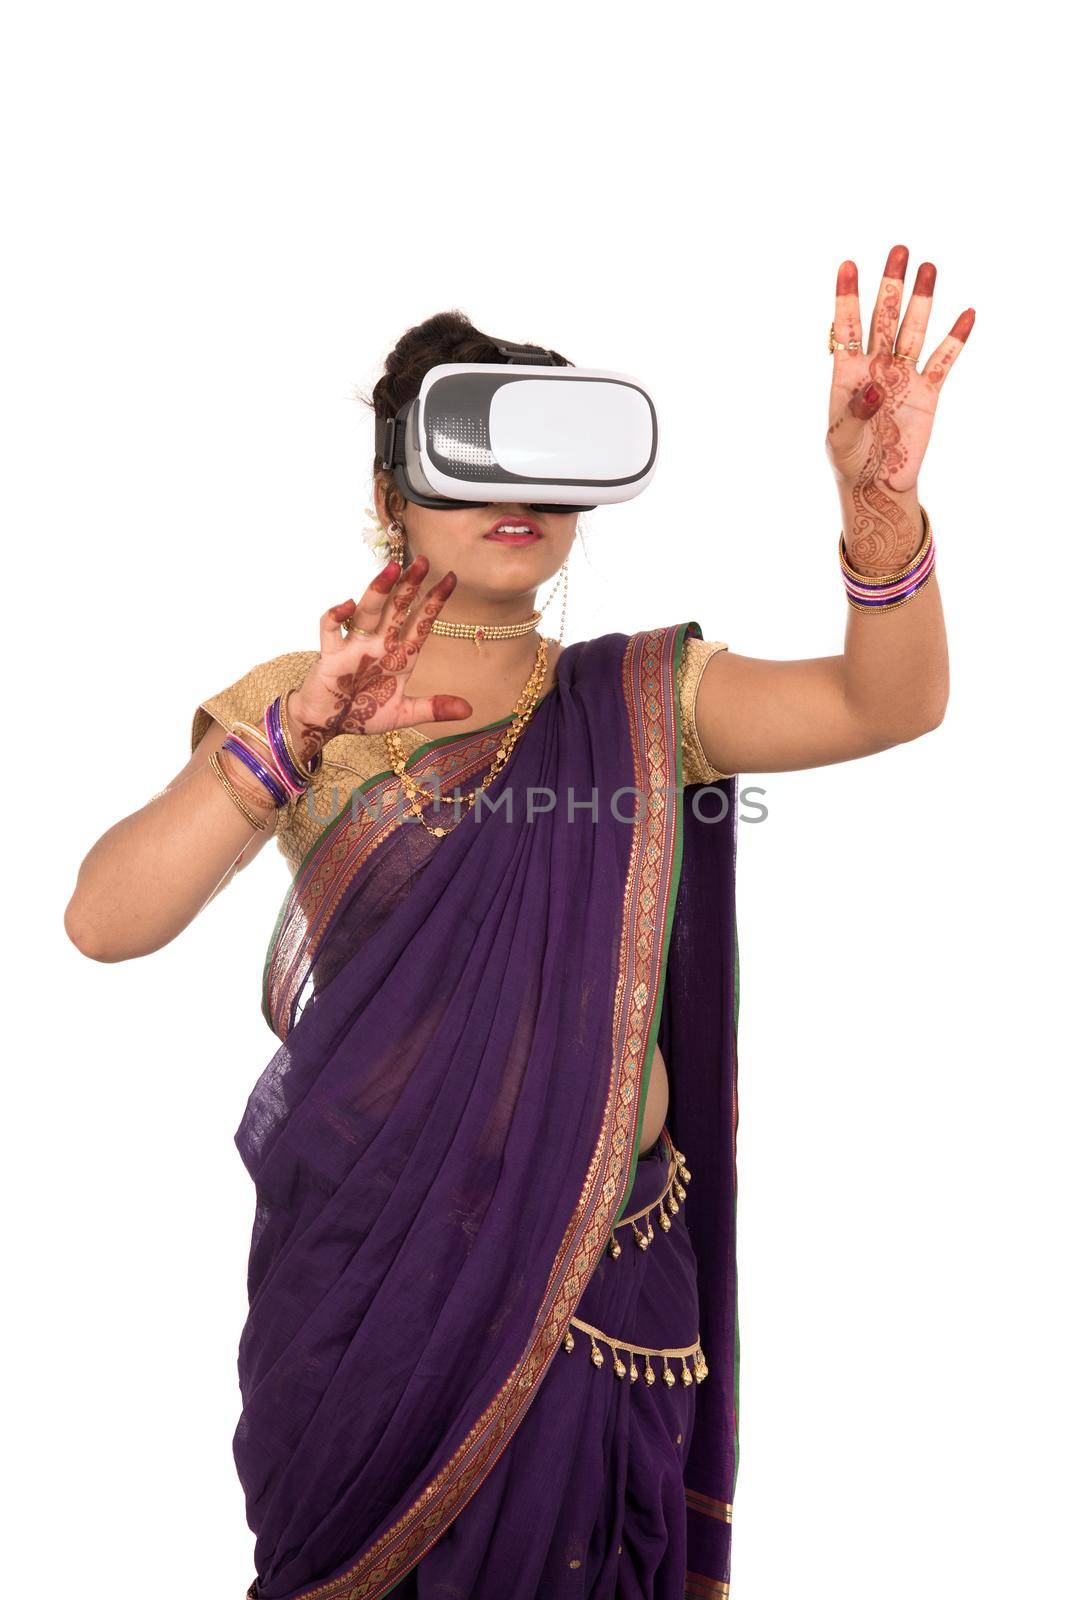 Indian traditional young woman in saree looking though VR device by DipakShelare